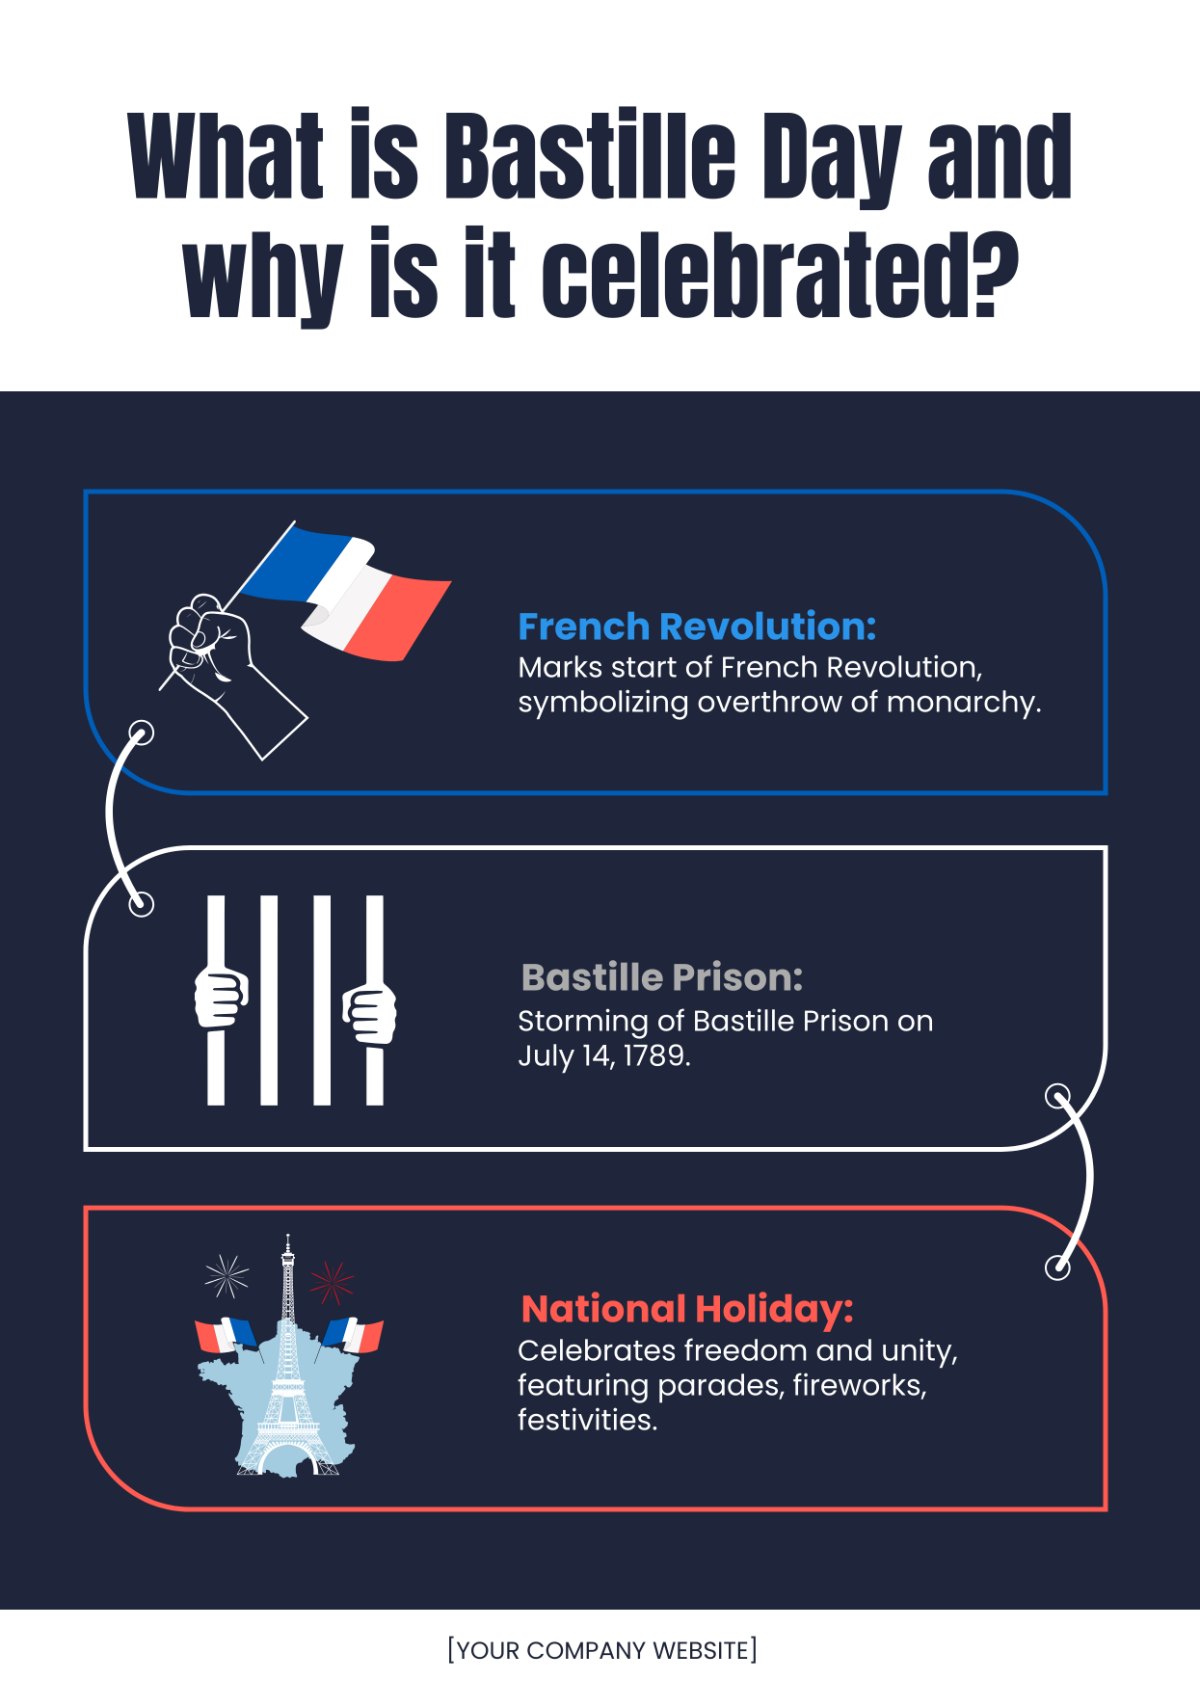 What is Bastille Day and why is it celebrated?